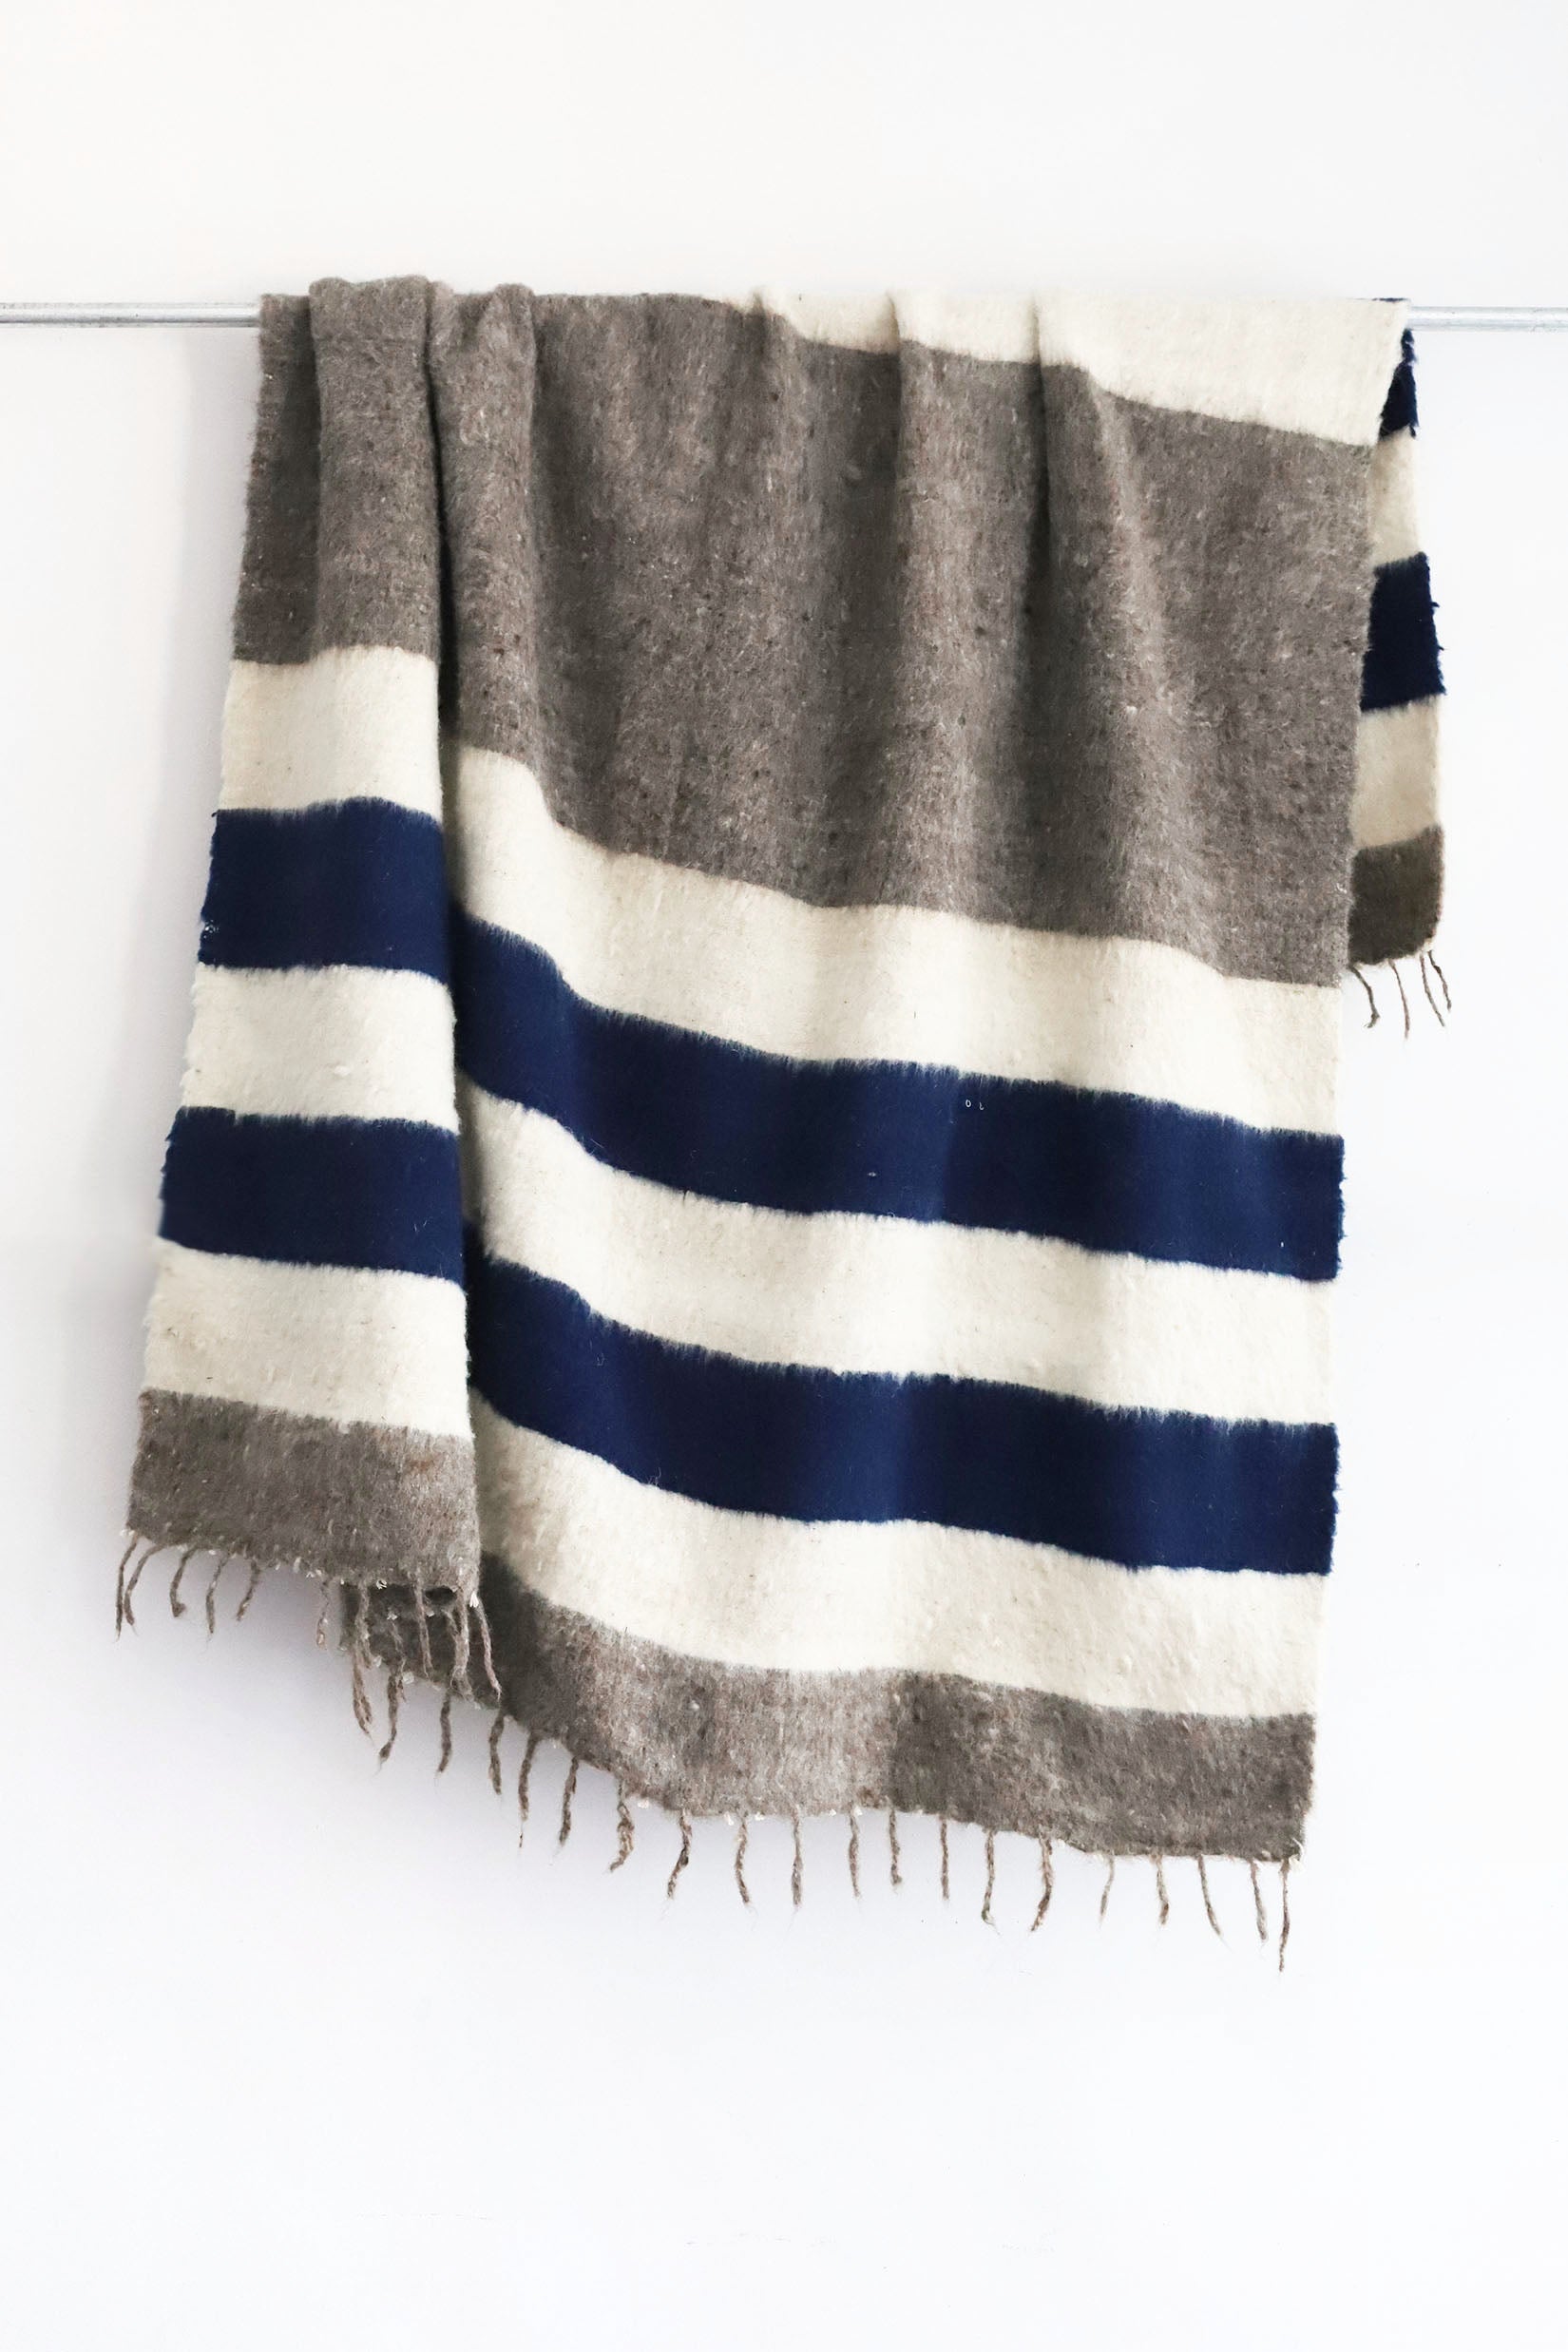 Queen sized ecru wool blanket with rows of thick horizontal blue indigo and grey stripes and a row of tied tassels at each end